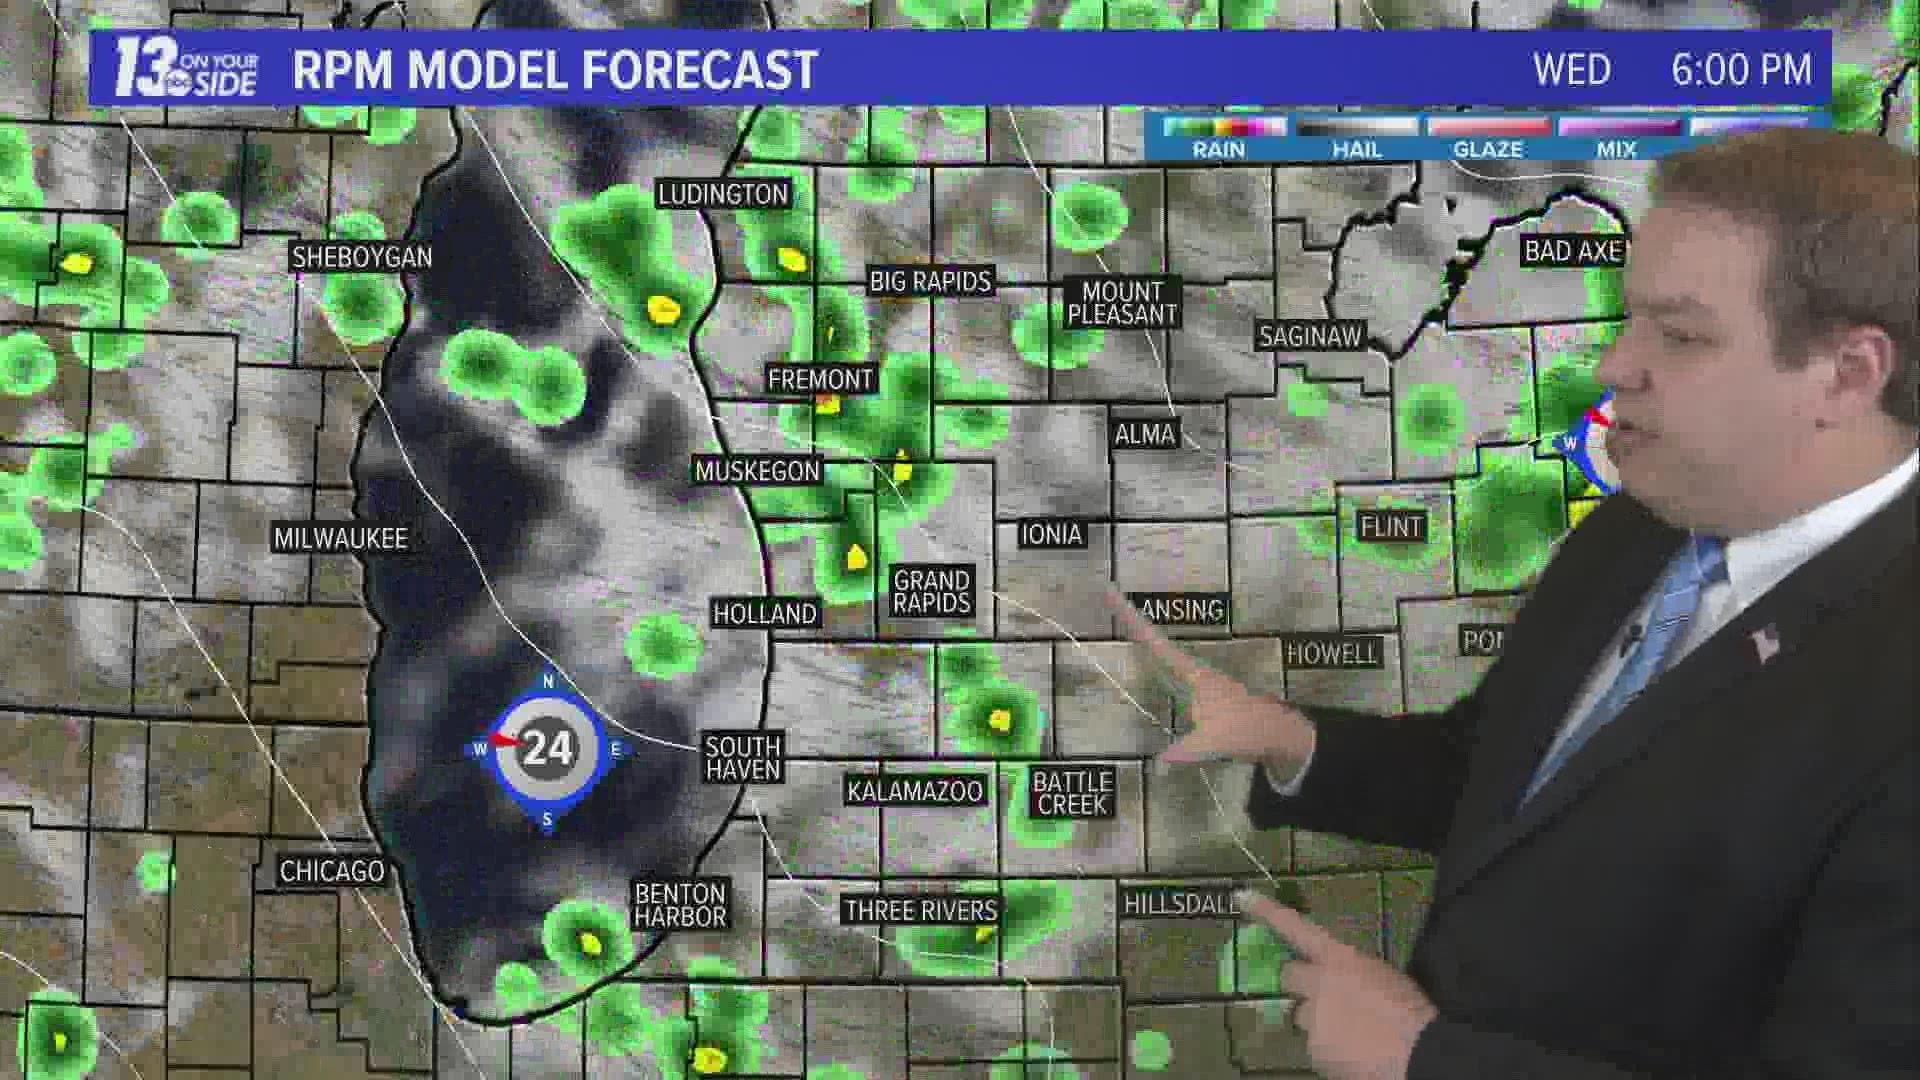 More rainy days are in the forecast this week. Meteorologist Michael Behrens has the latest details.